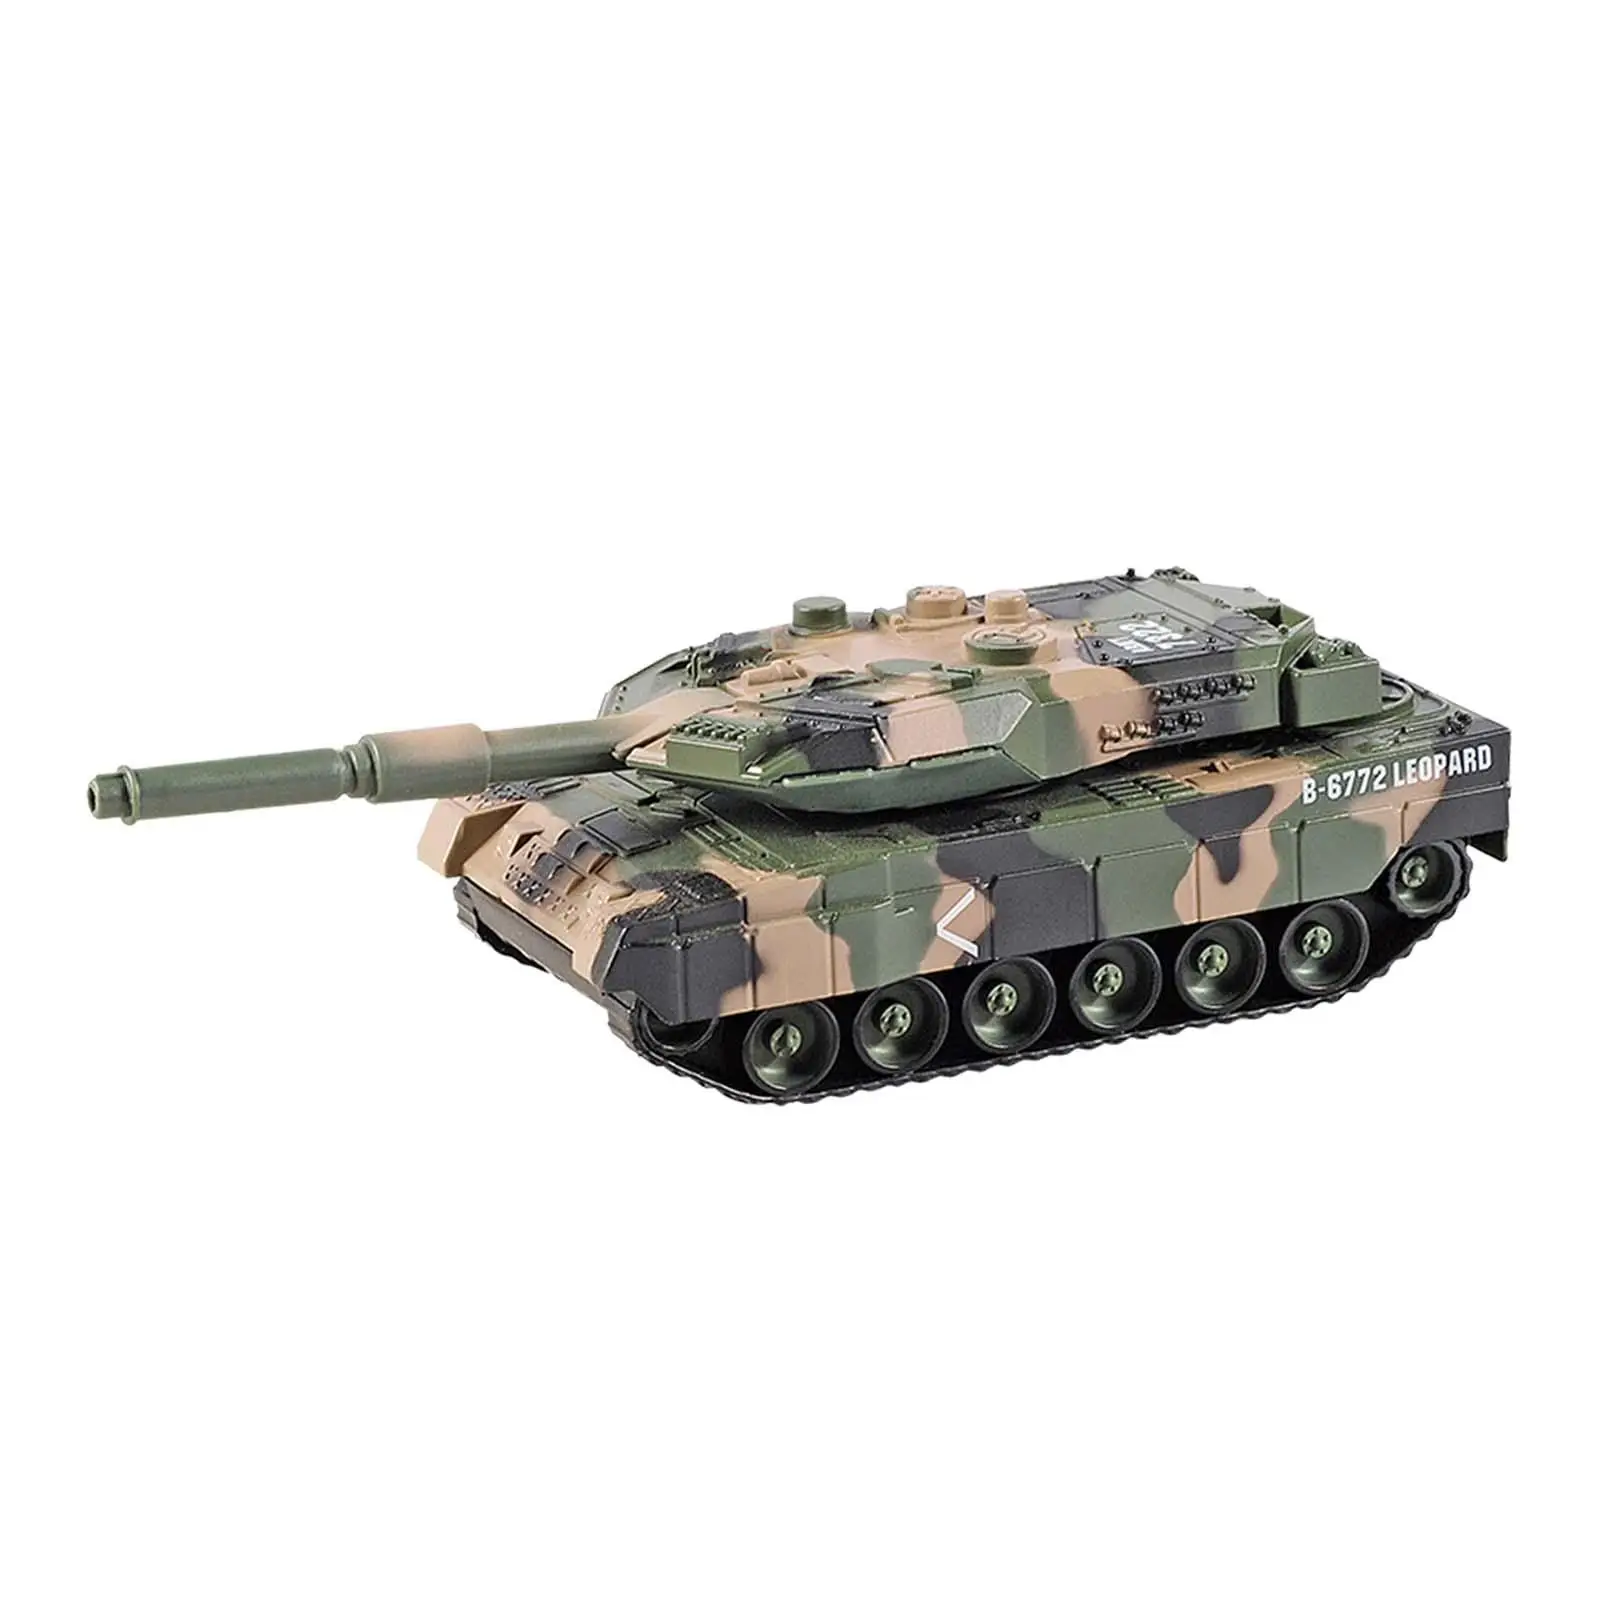 1:24 Tank Toy Pullback Motion with Light and Sound Educational Toys Vehicle Vehicle for Kids Boy 3-7 Years Old Girls Gift